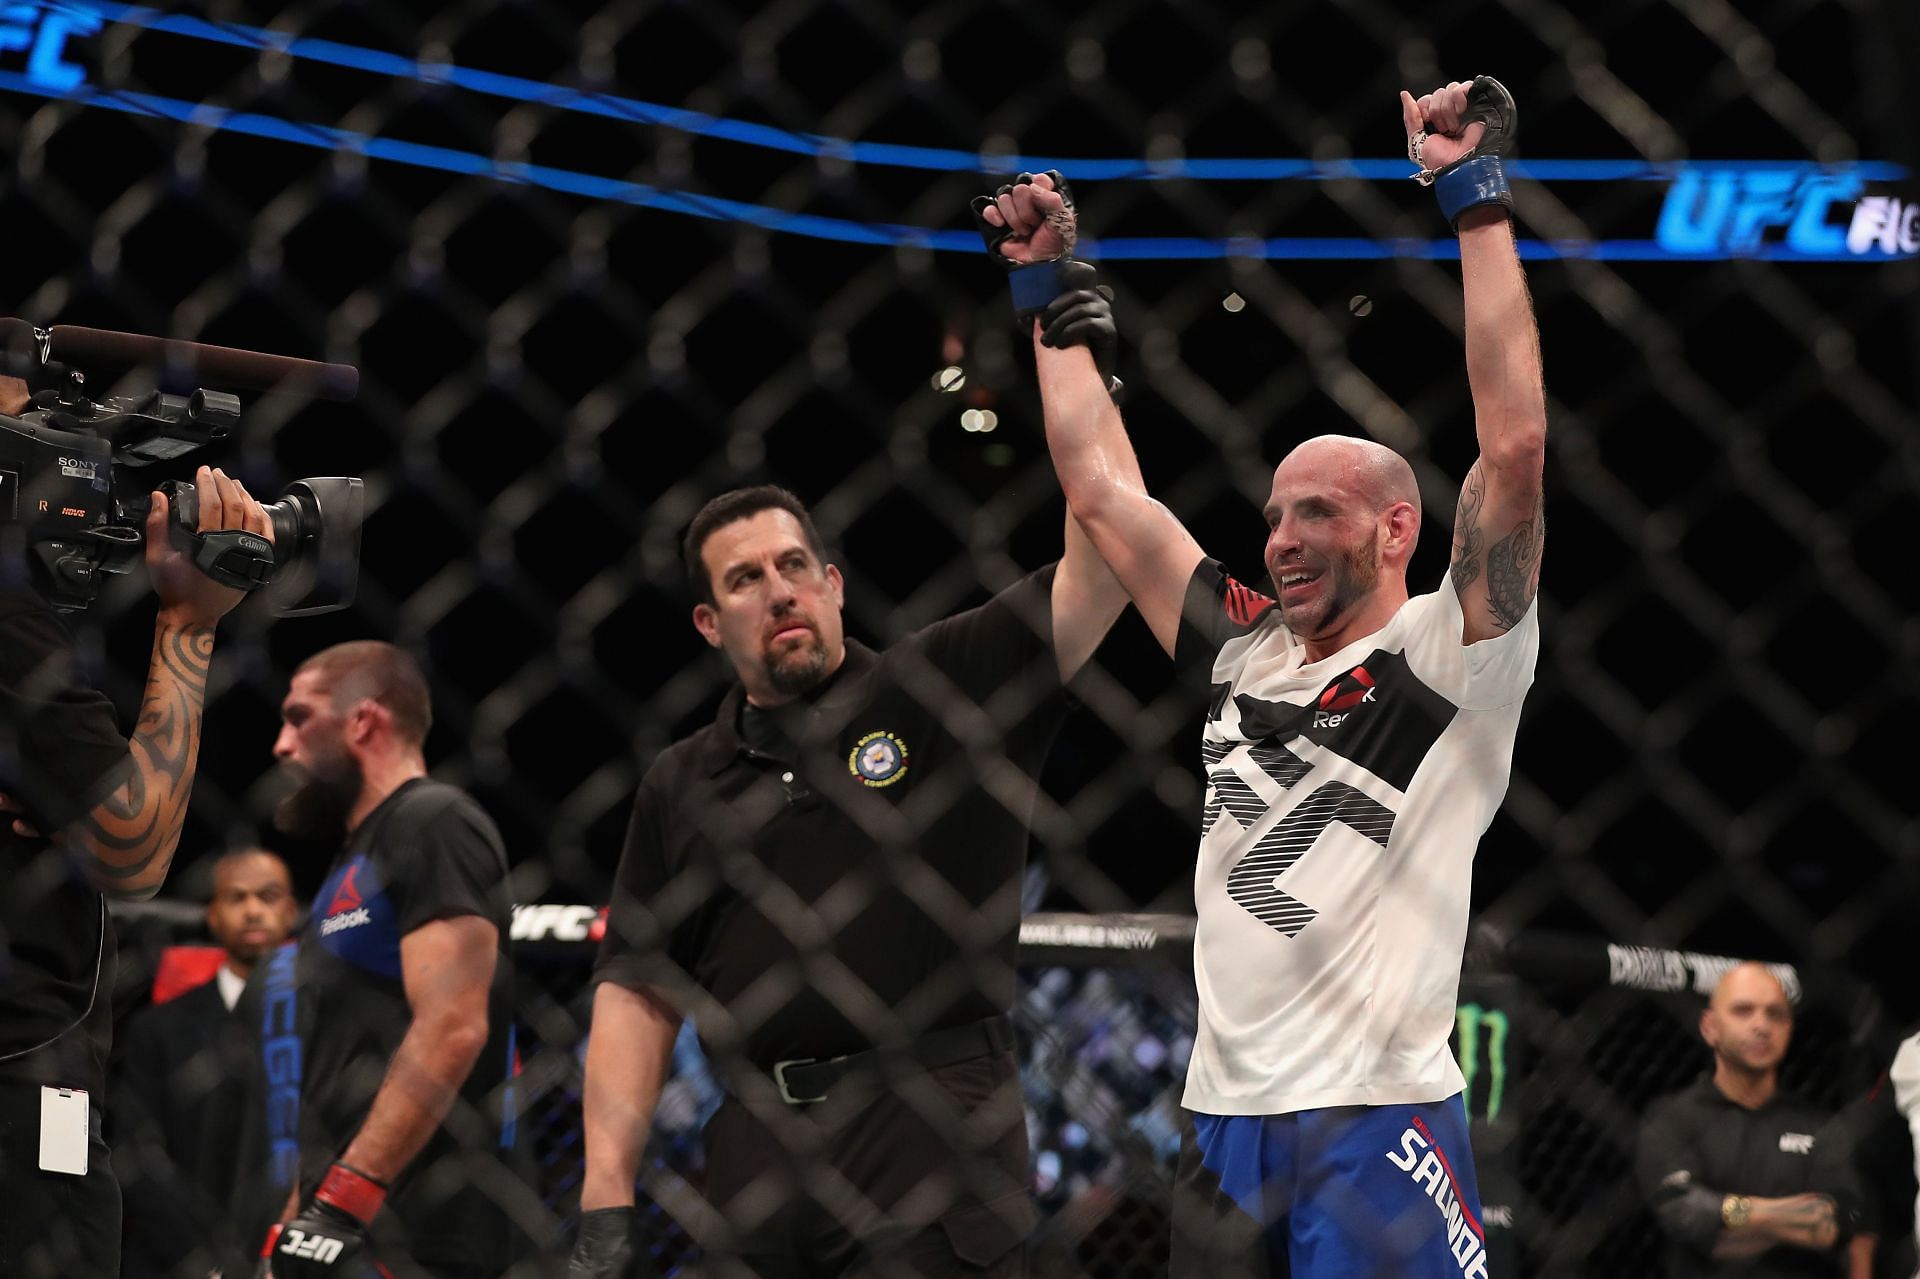 Ben Saunders used the first oma plata in octagon history to submit his foe in 2014